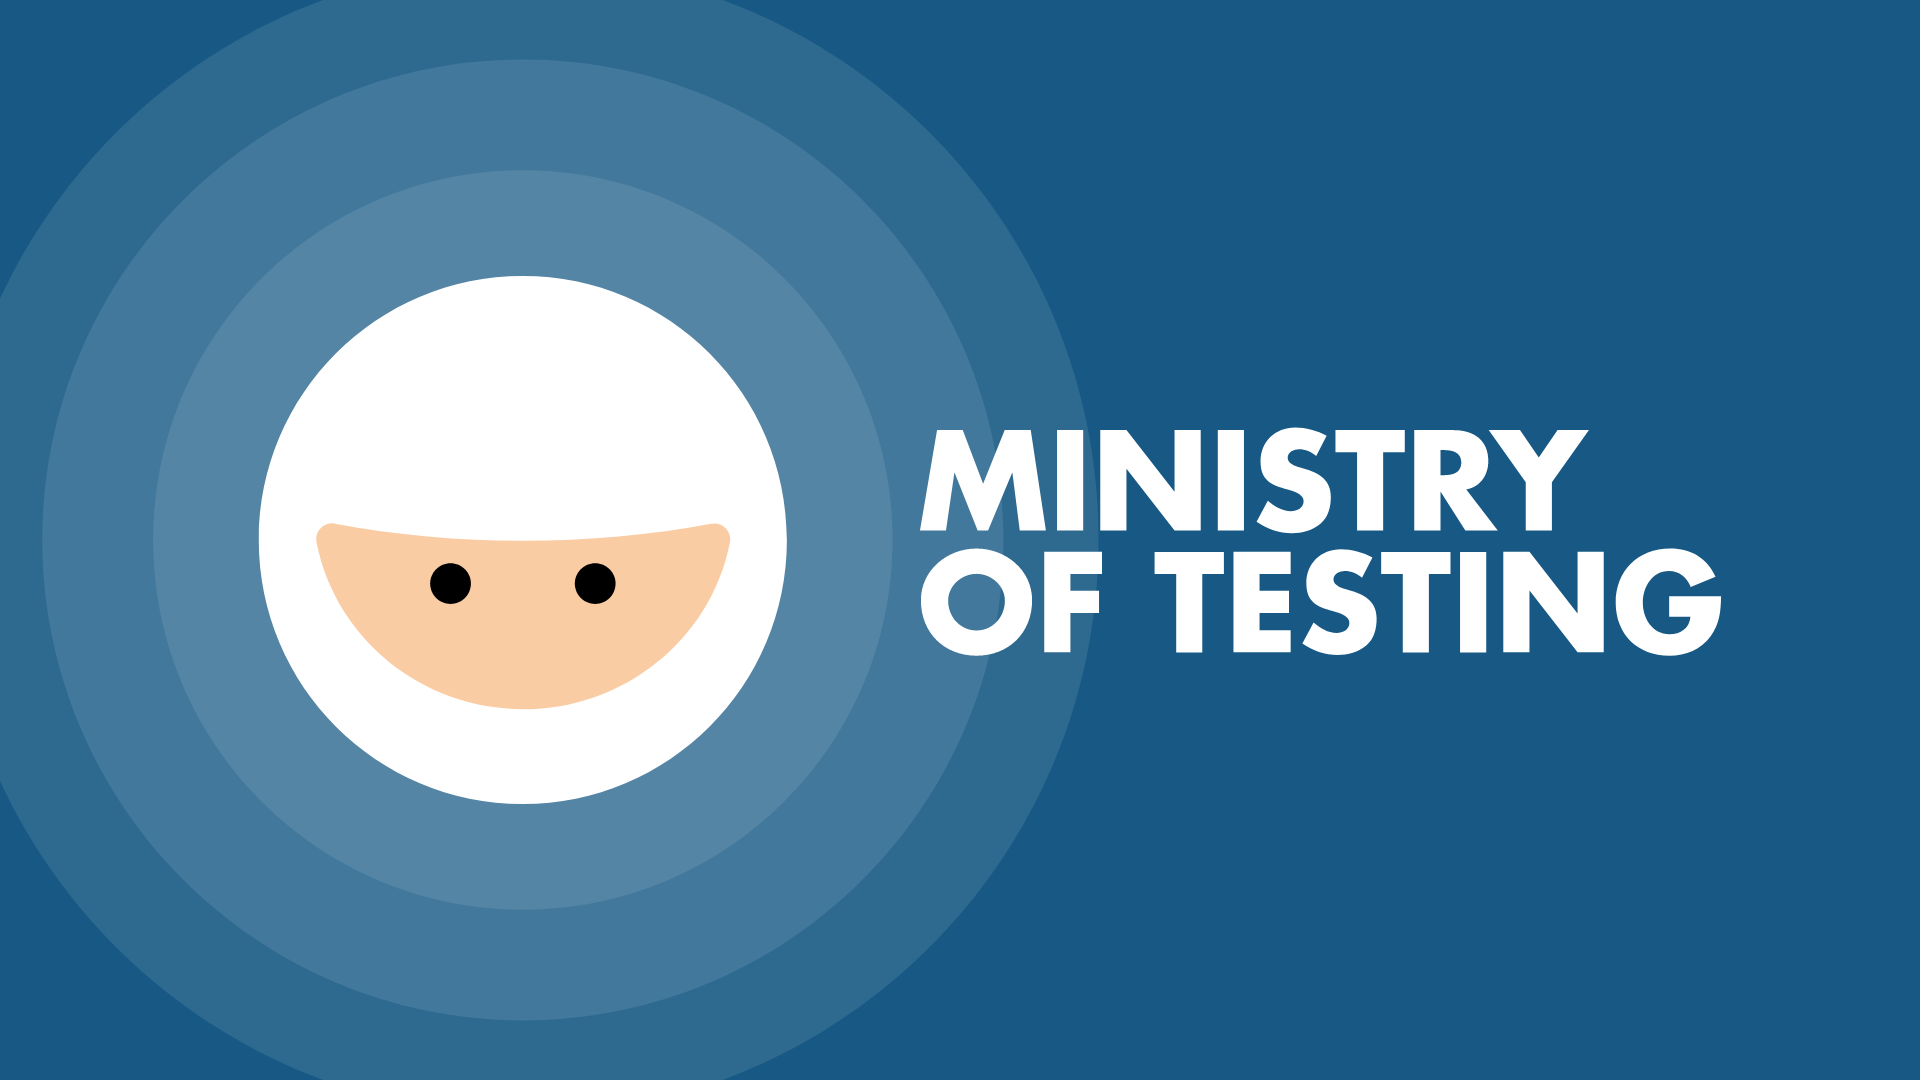 Do We Belong? What the Belong-O-Meter Tells Us About the Ministry of Testing Community